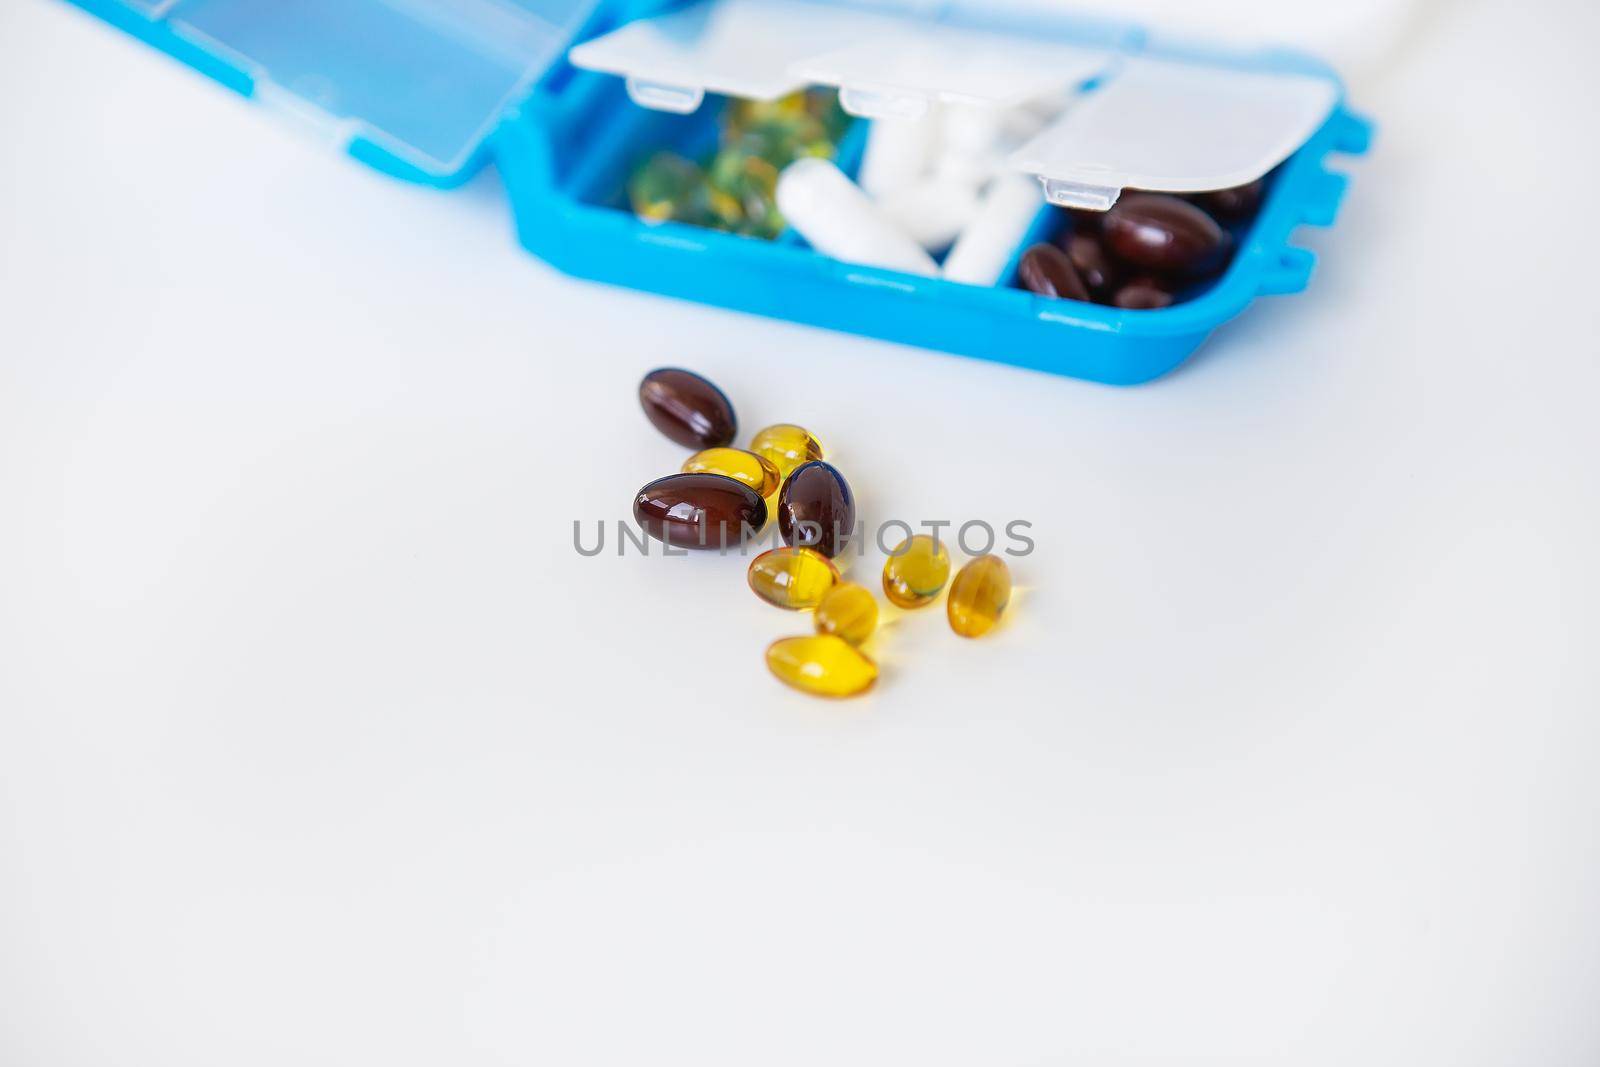 Pouring pills and capsules on a white background close-up. Top view with copy space. Medicine concept